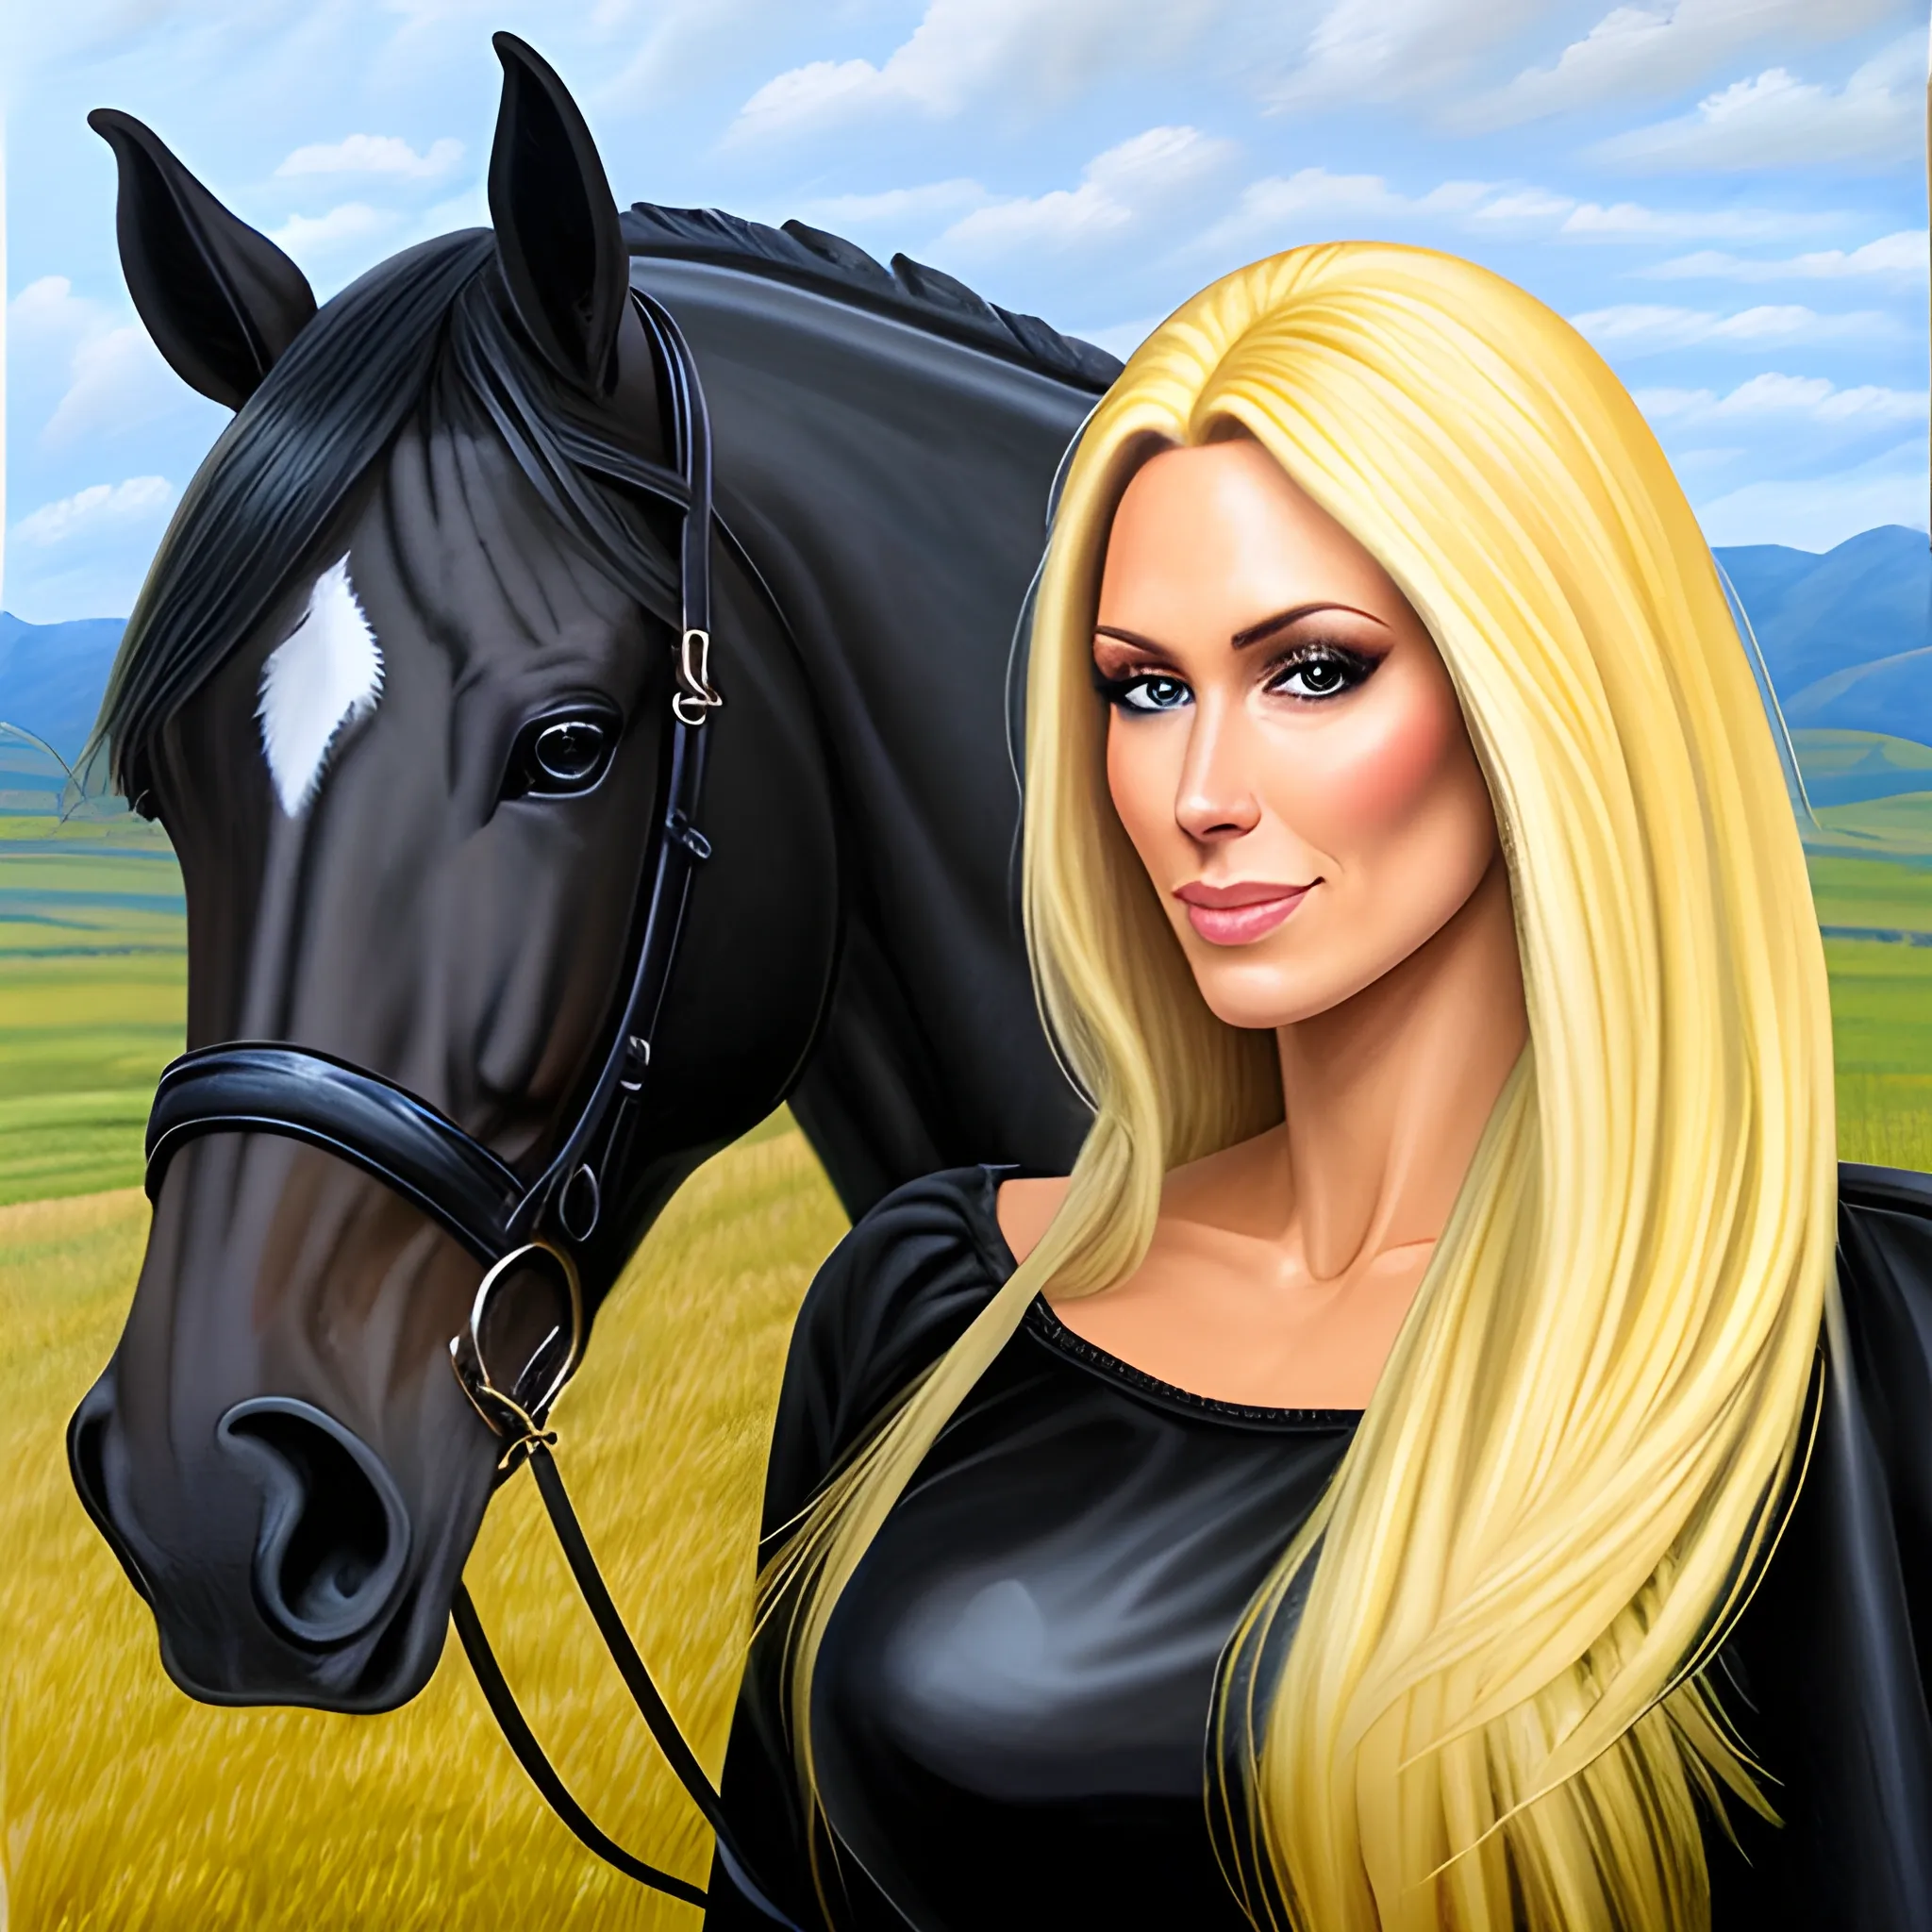 , Oil Painting little girl blond  hair riding small black horse

